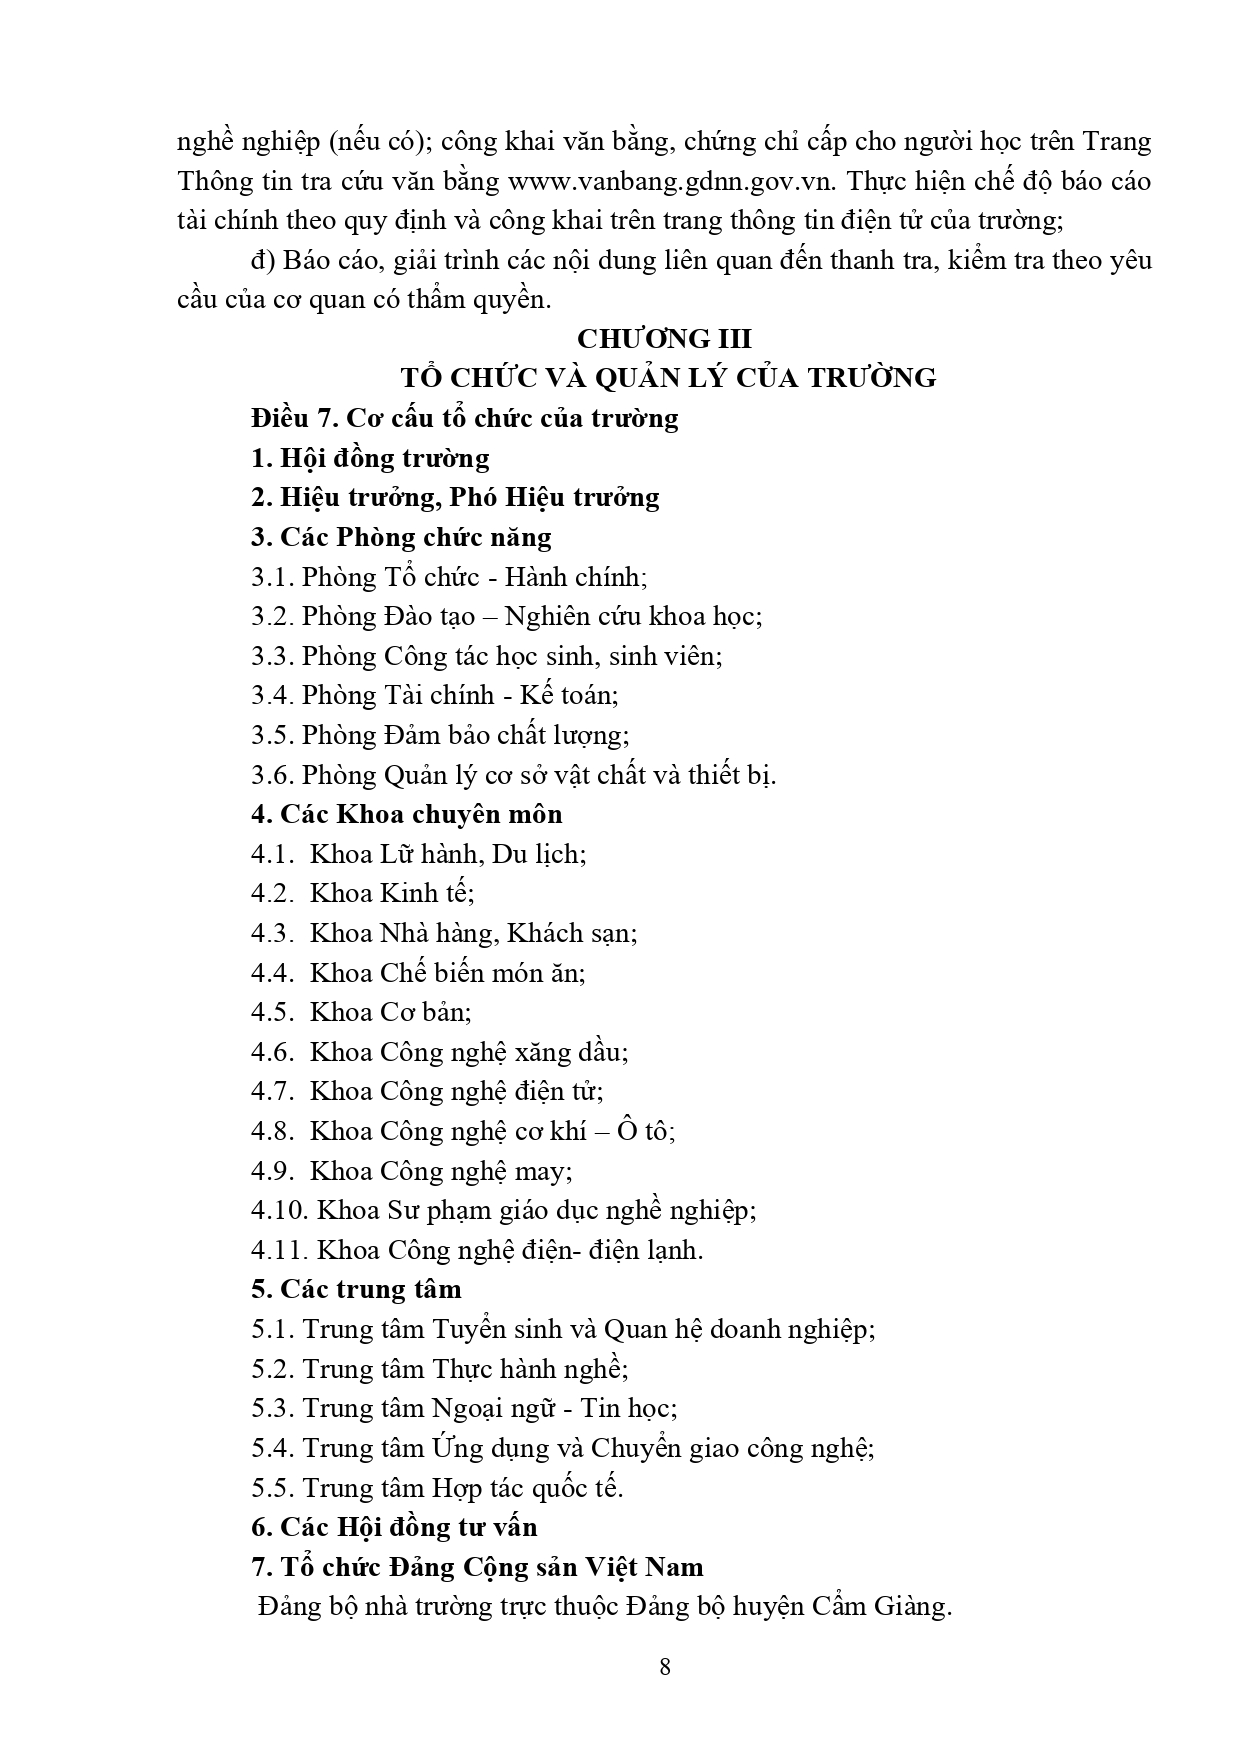 QUY CHE TO CHUC VA HOAT DONG CUA TRUONG CD DLCT page-0008